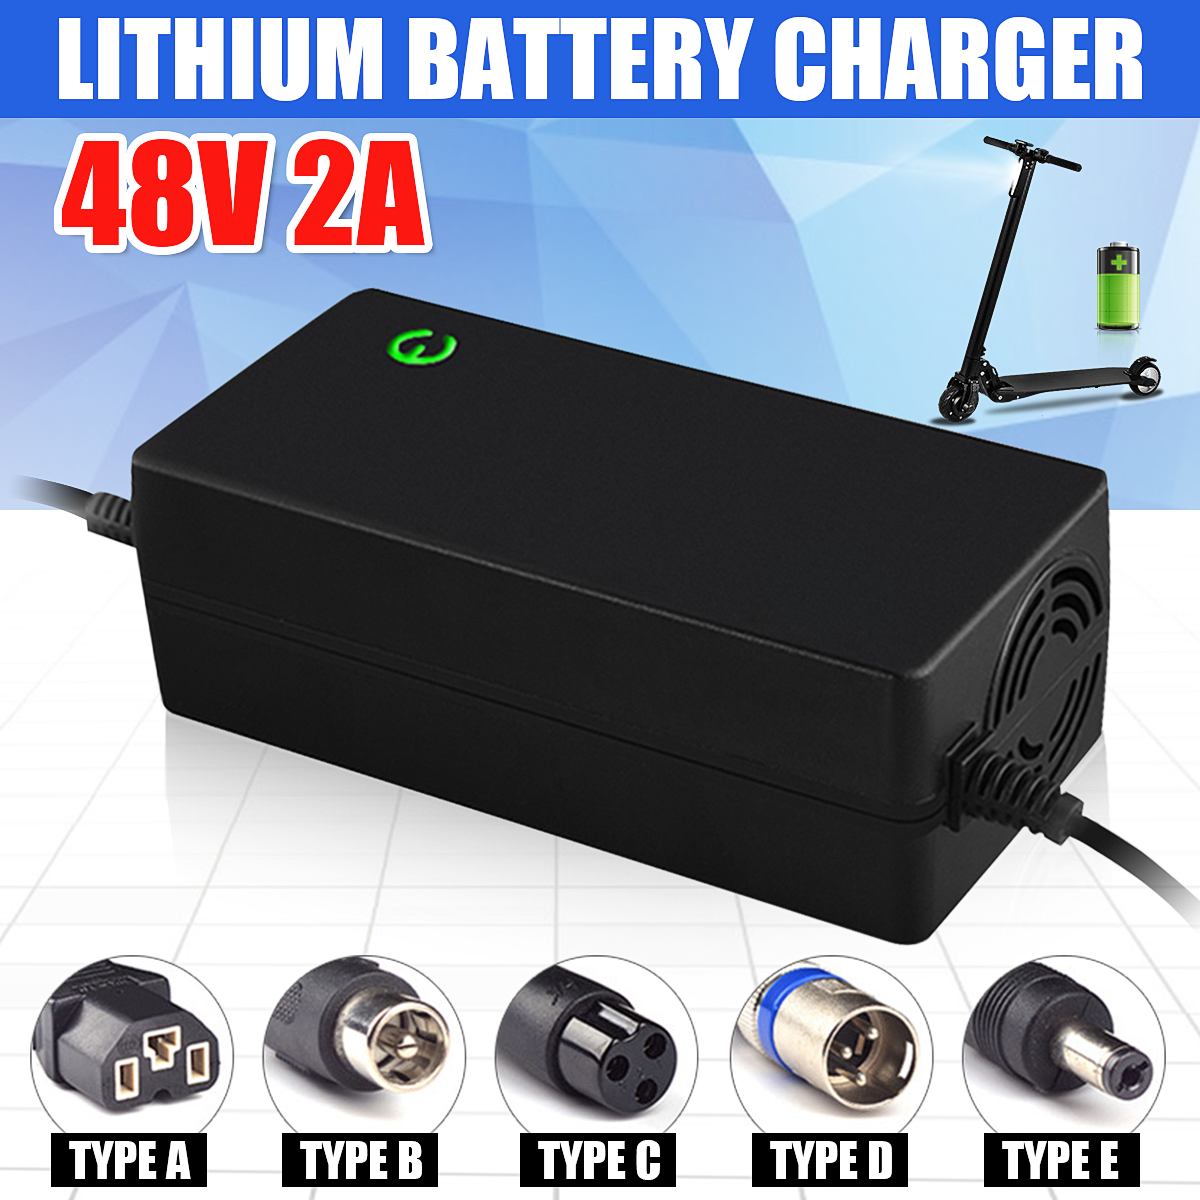 48V-Lithium-Battery-Charger-2A-Electric-Bike-Scooter-Charger-Battery-Charging-Equipment-1373466-2